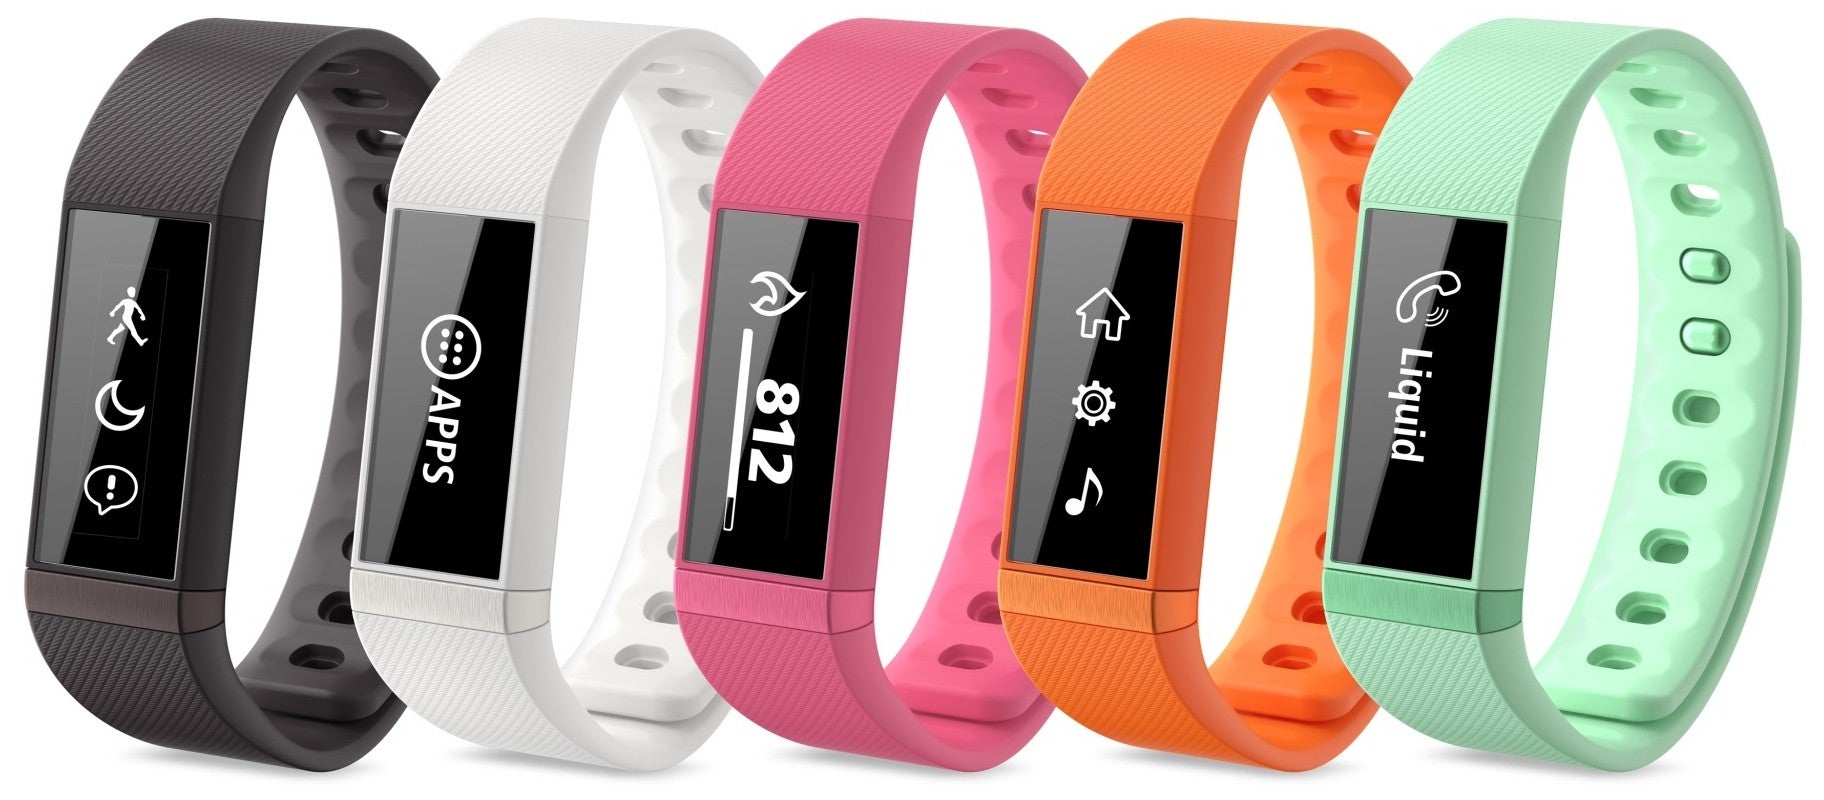 Acer&#039;s strategy regarding smartwatches and wearables: get the product out and see how it goes